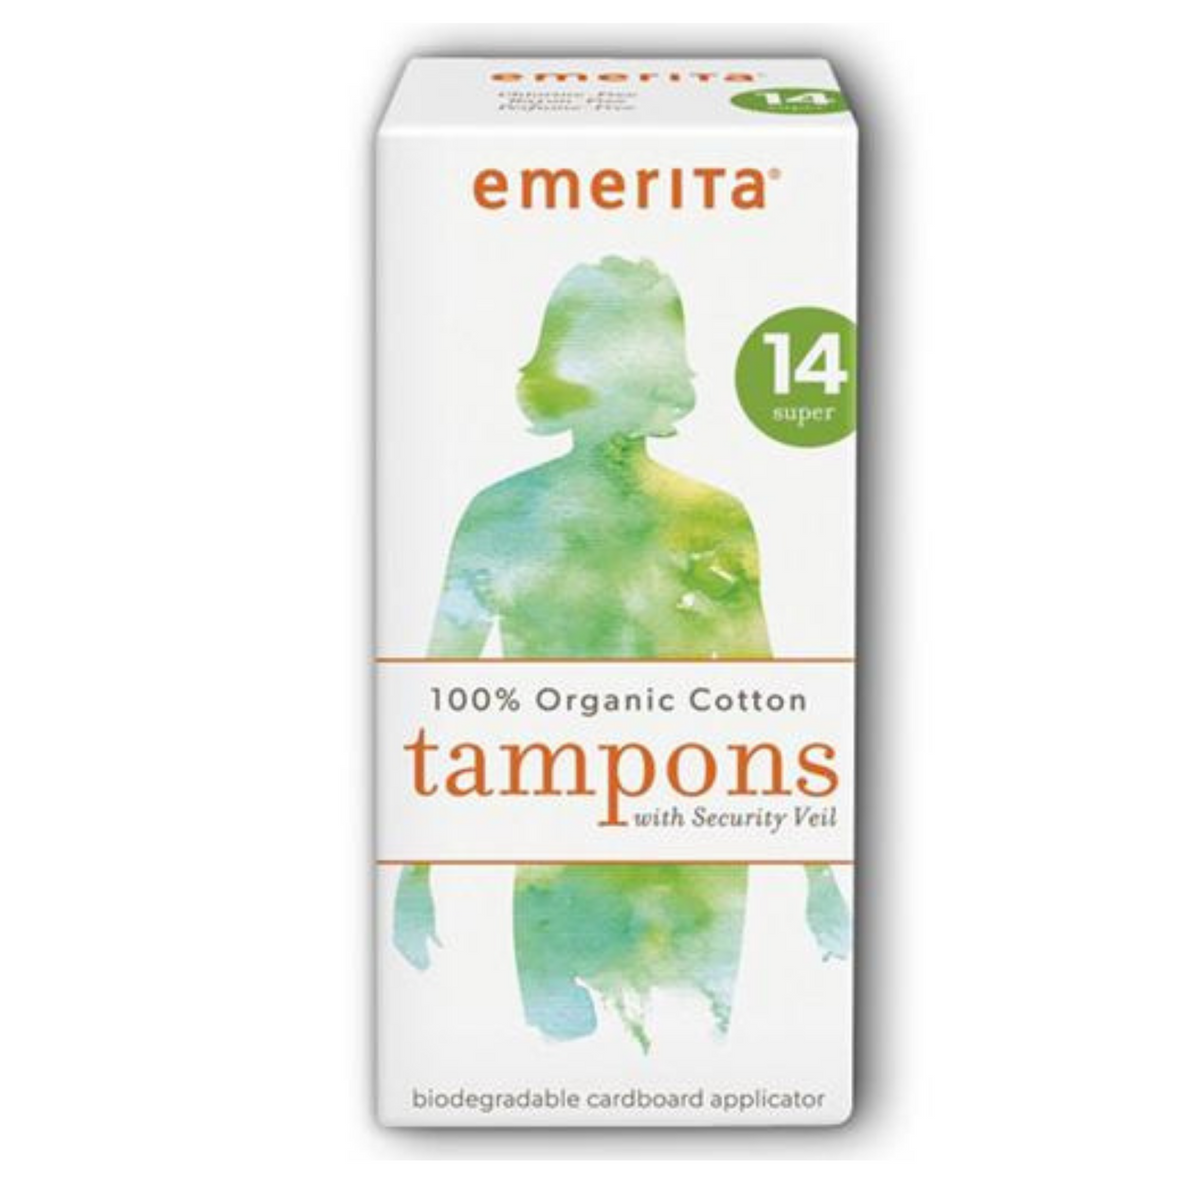 Primary image of Organic Cotton Tampons